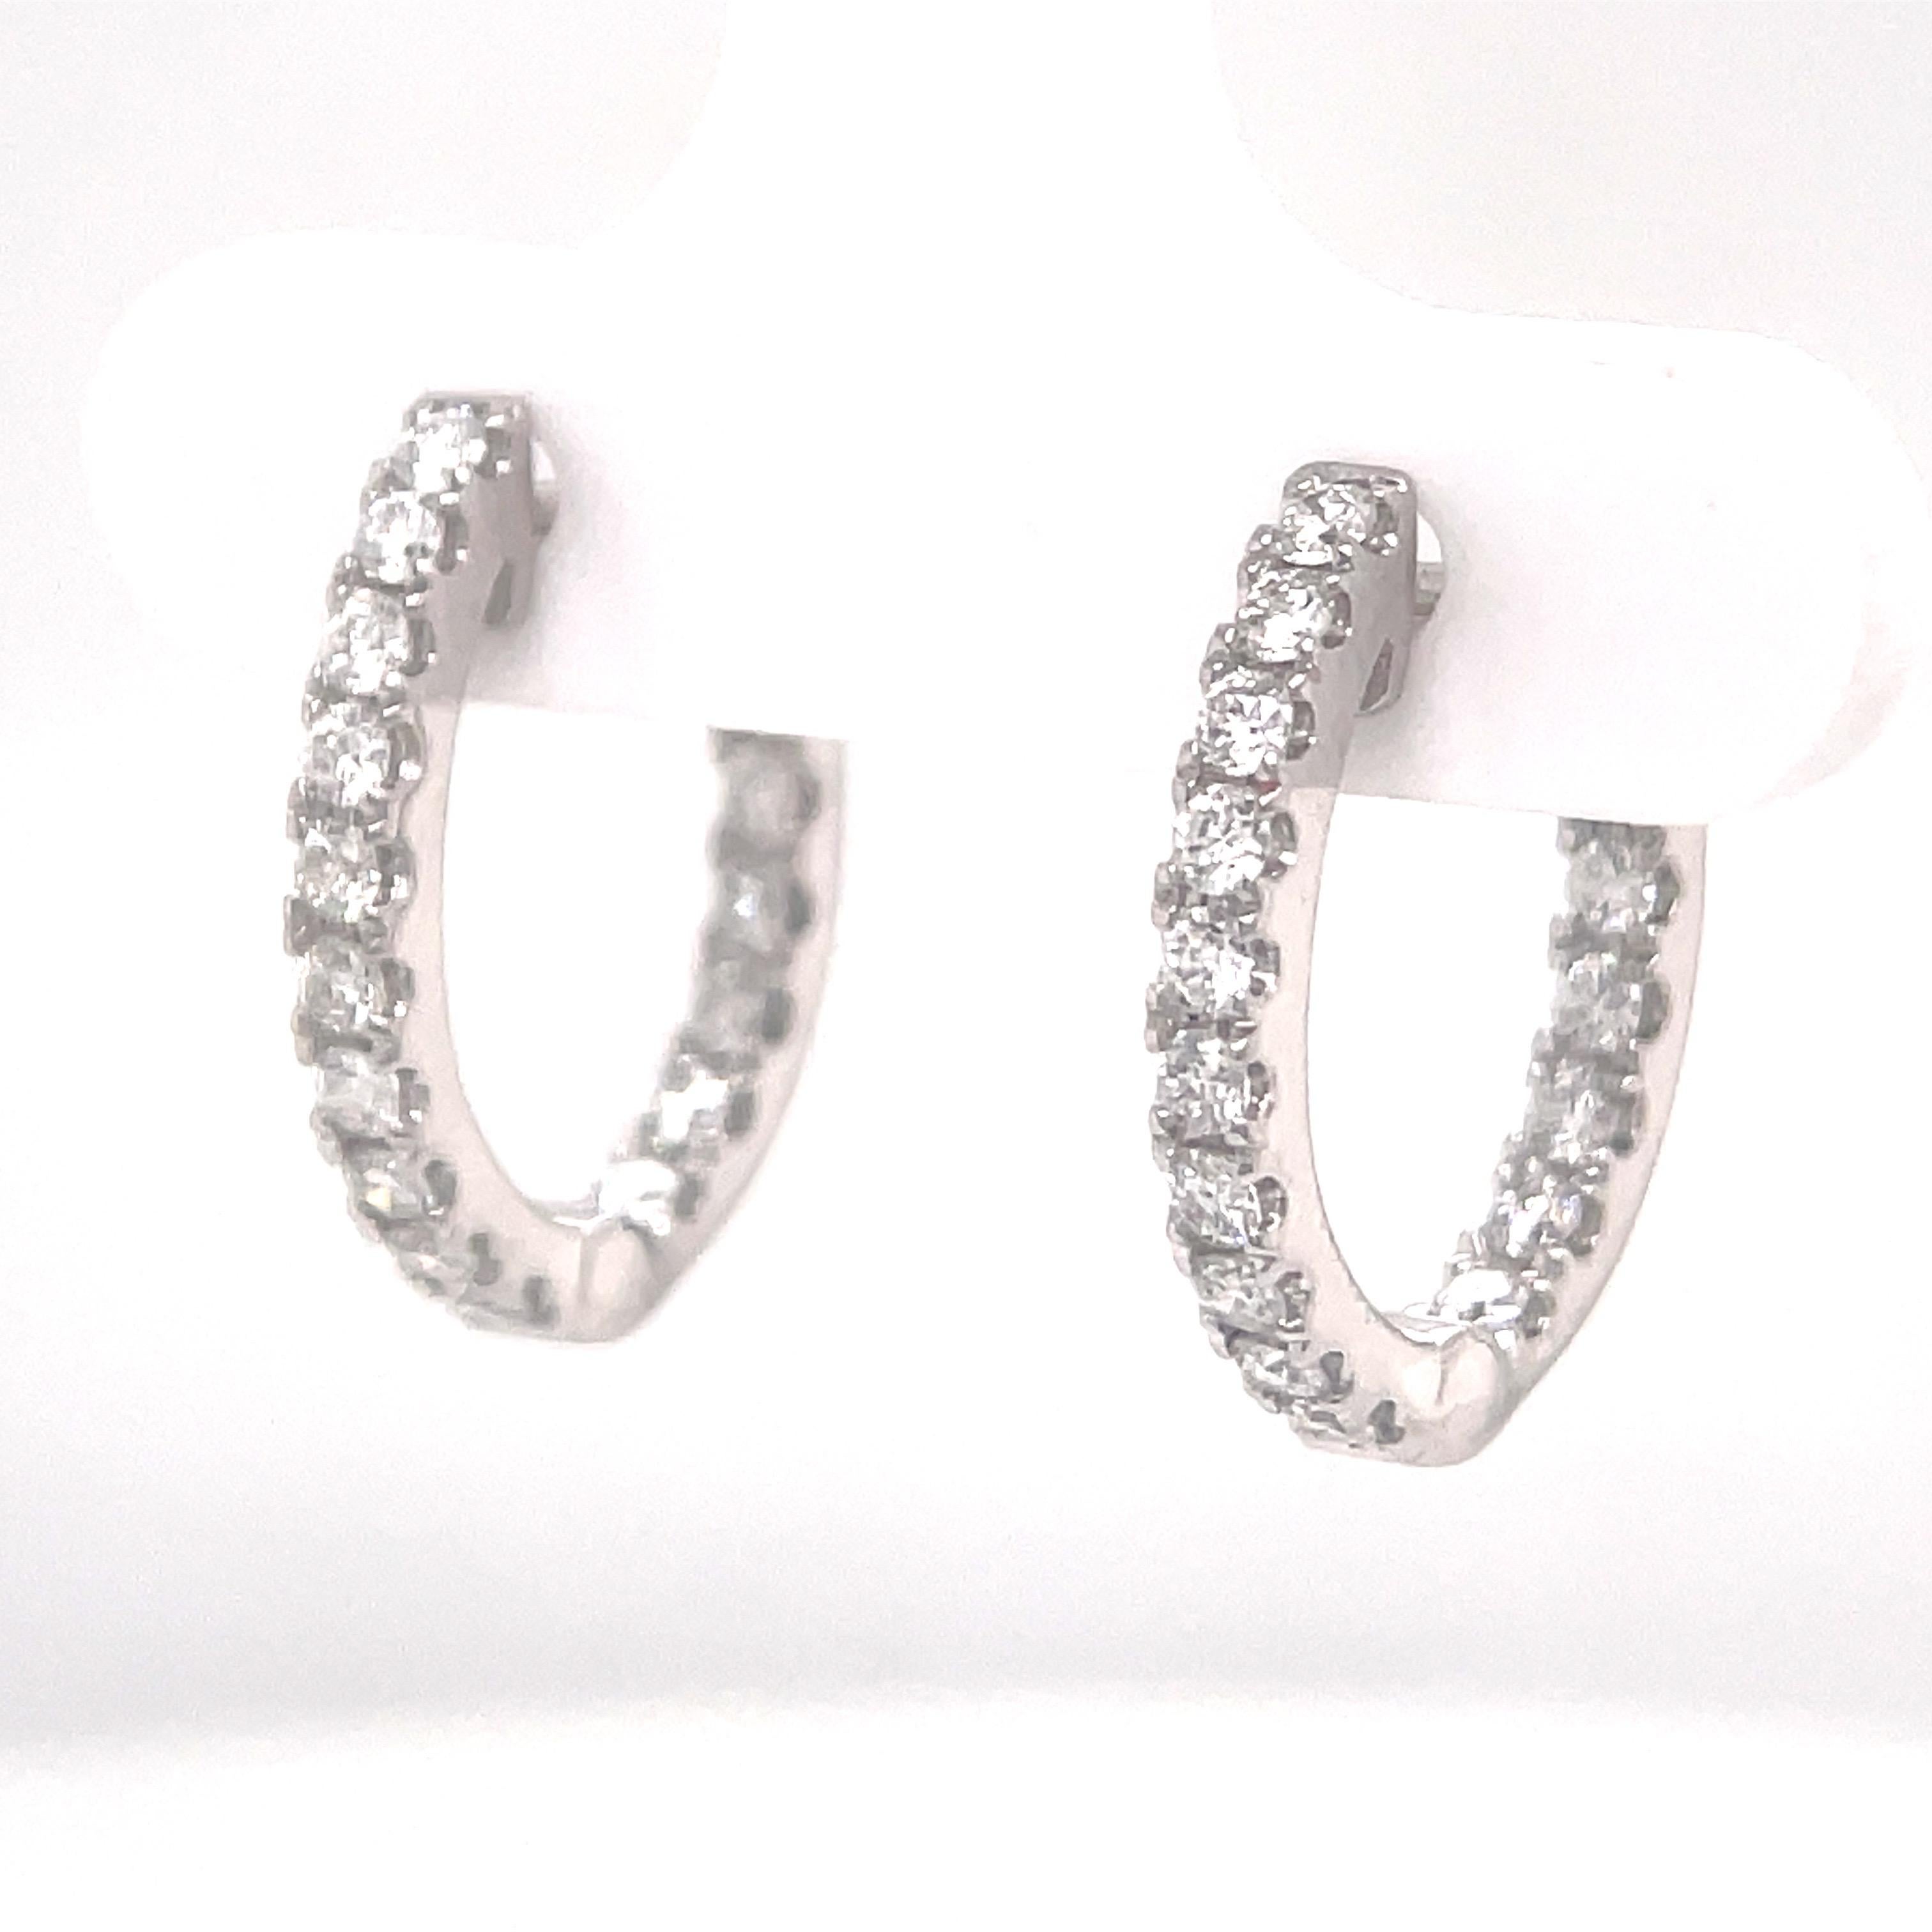 Diamond Hoop Earrings 0.82 Carats 14 Karat White Gold 2.9 Grams In New Condition For Sale In New York, NY